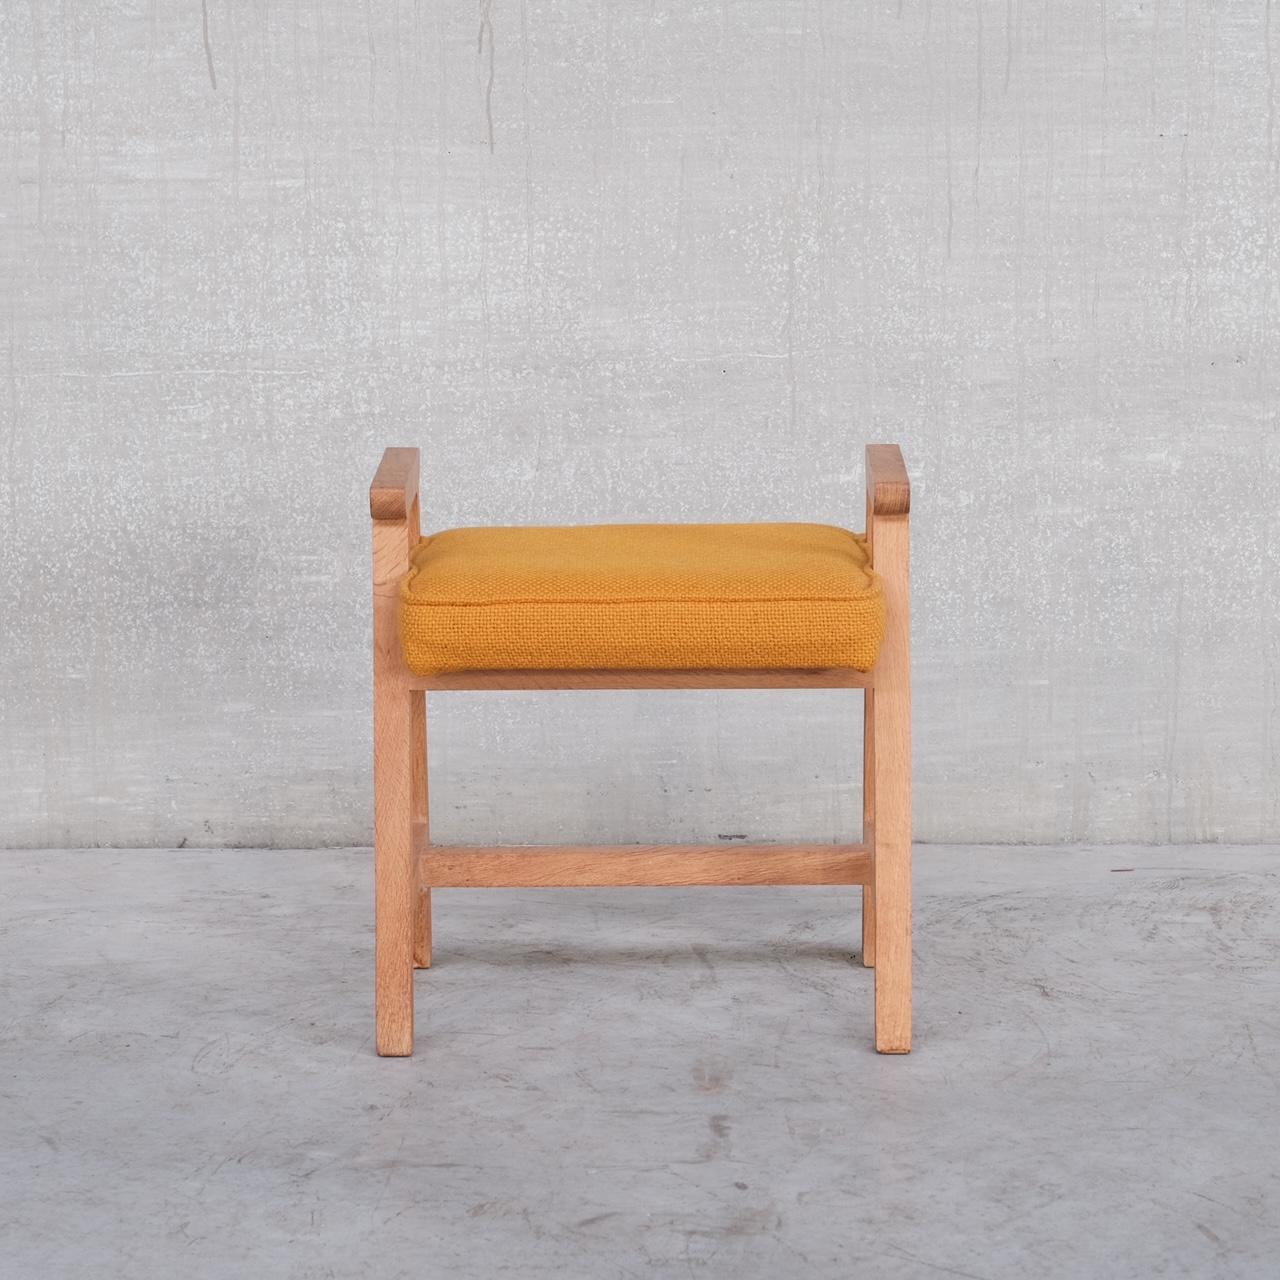 An oak framed upholstered stool. 

Ideal for an occasional chair, vanity stool etc. 

France, c1960s. 

By legendary French designers Guillerme et Chambron.

Original upholstery is in good condition, but normally we encourage to update them,